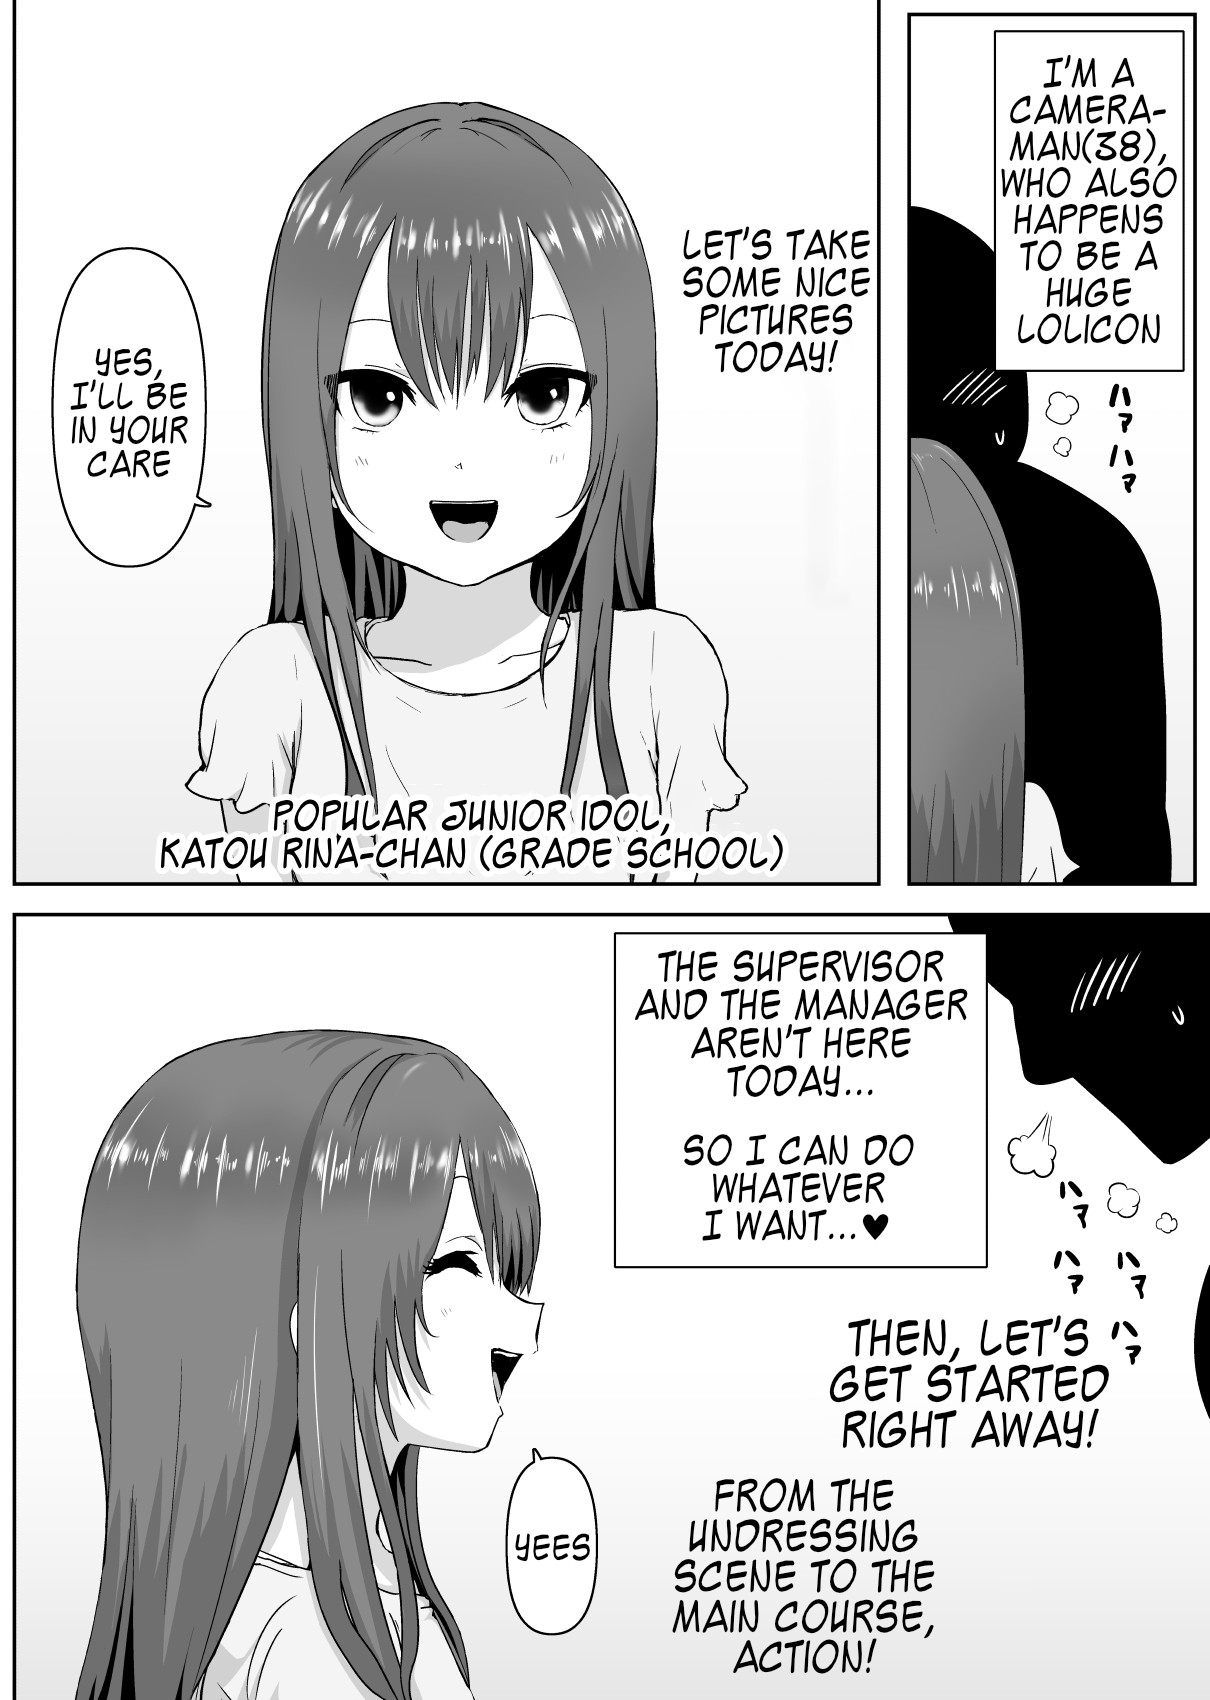 Hentai Manga Comic-Playing a Stealthy Prank On a Junior Idol during Her Photo Session-Read-3